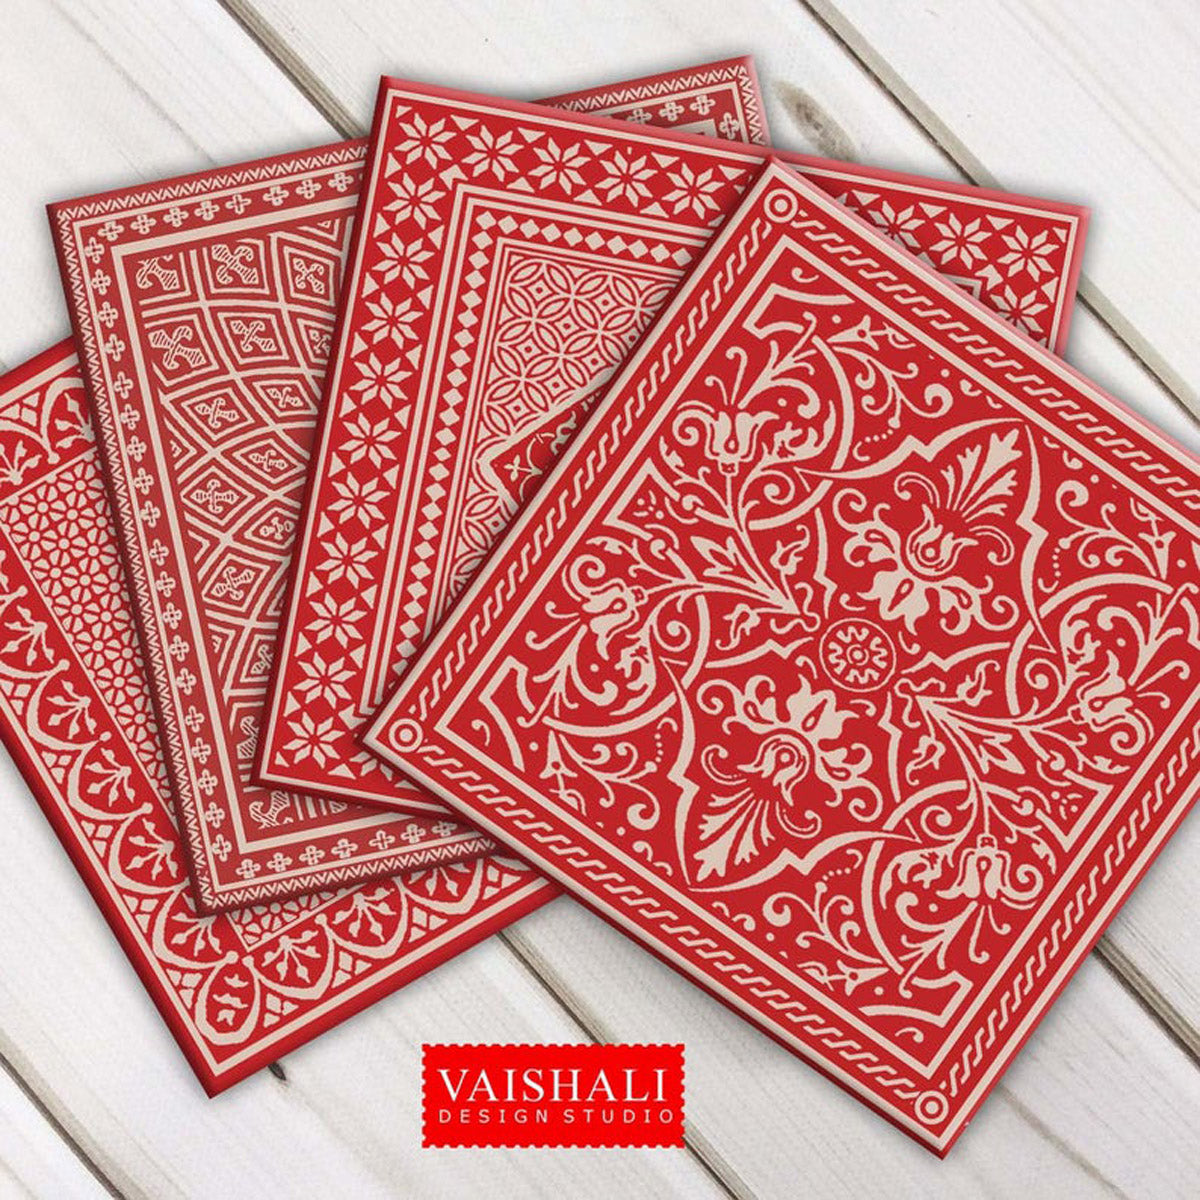 Playing card back pattern, printable coasters, set of 4 designs, 3.8"X3.8"